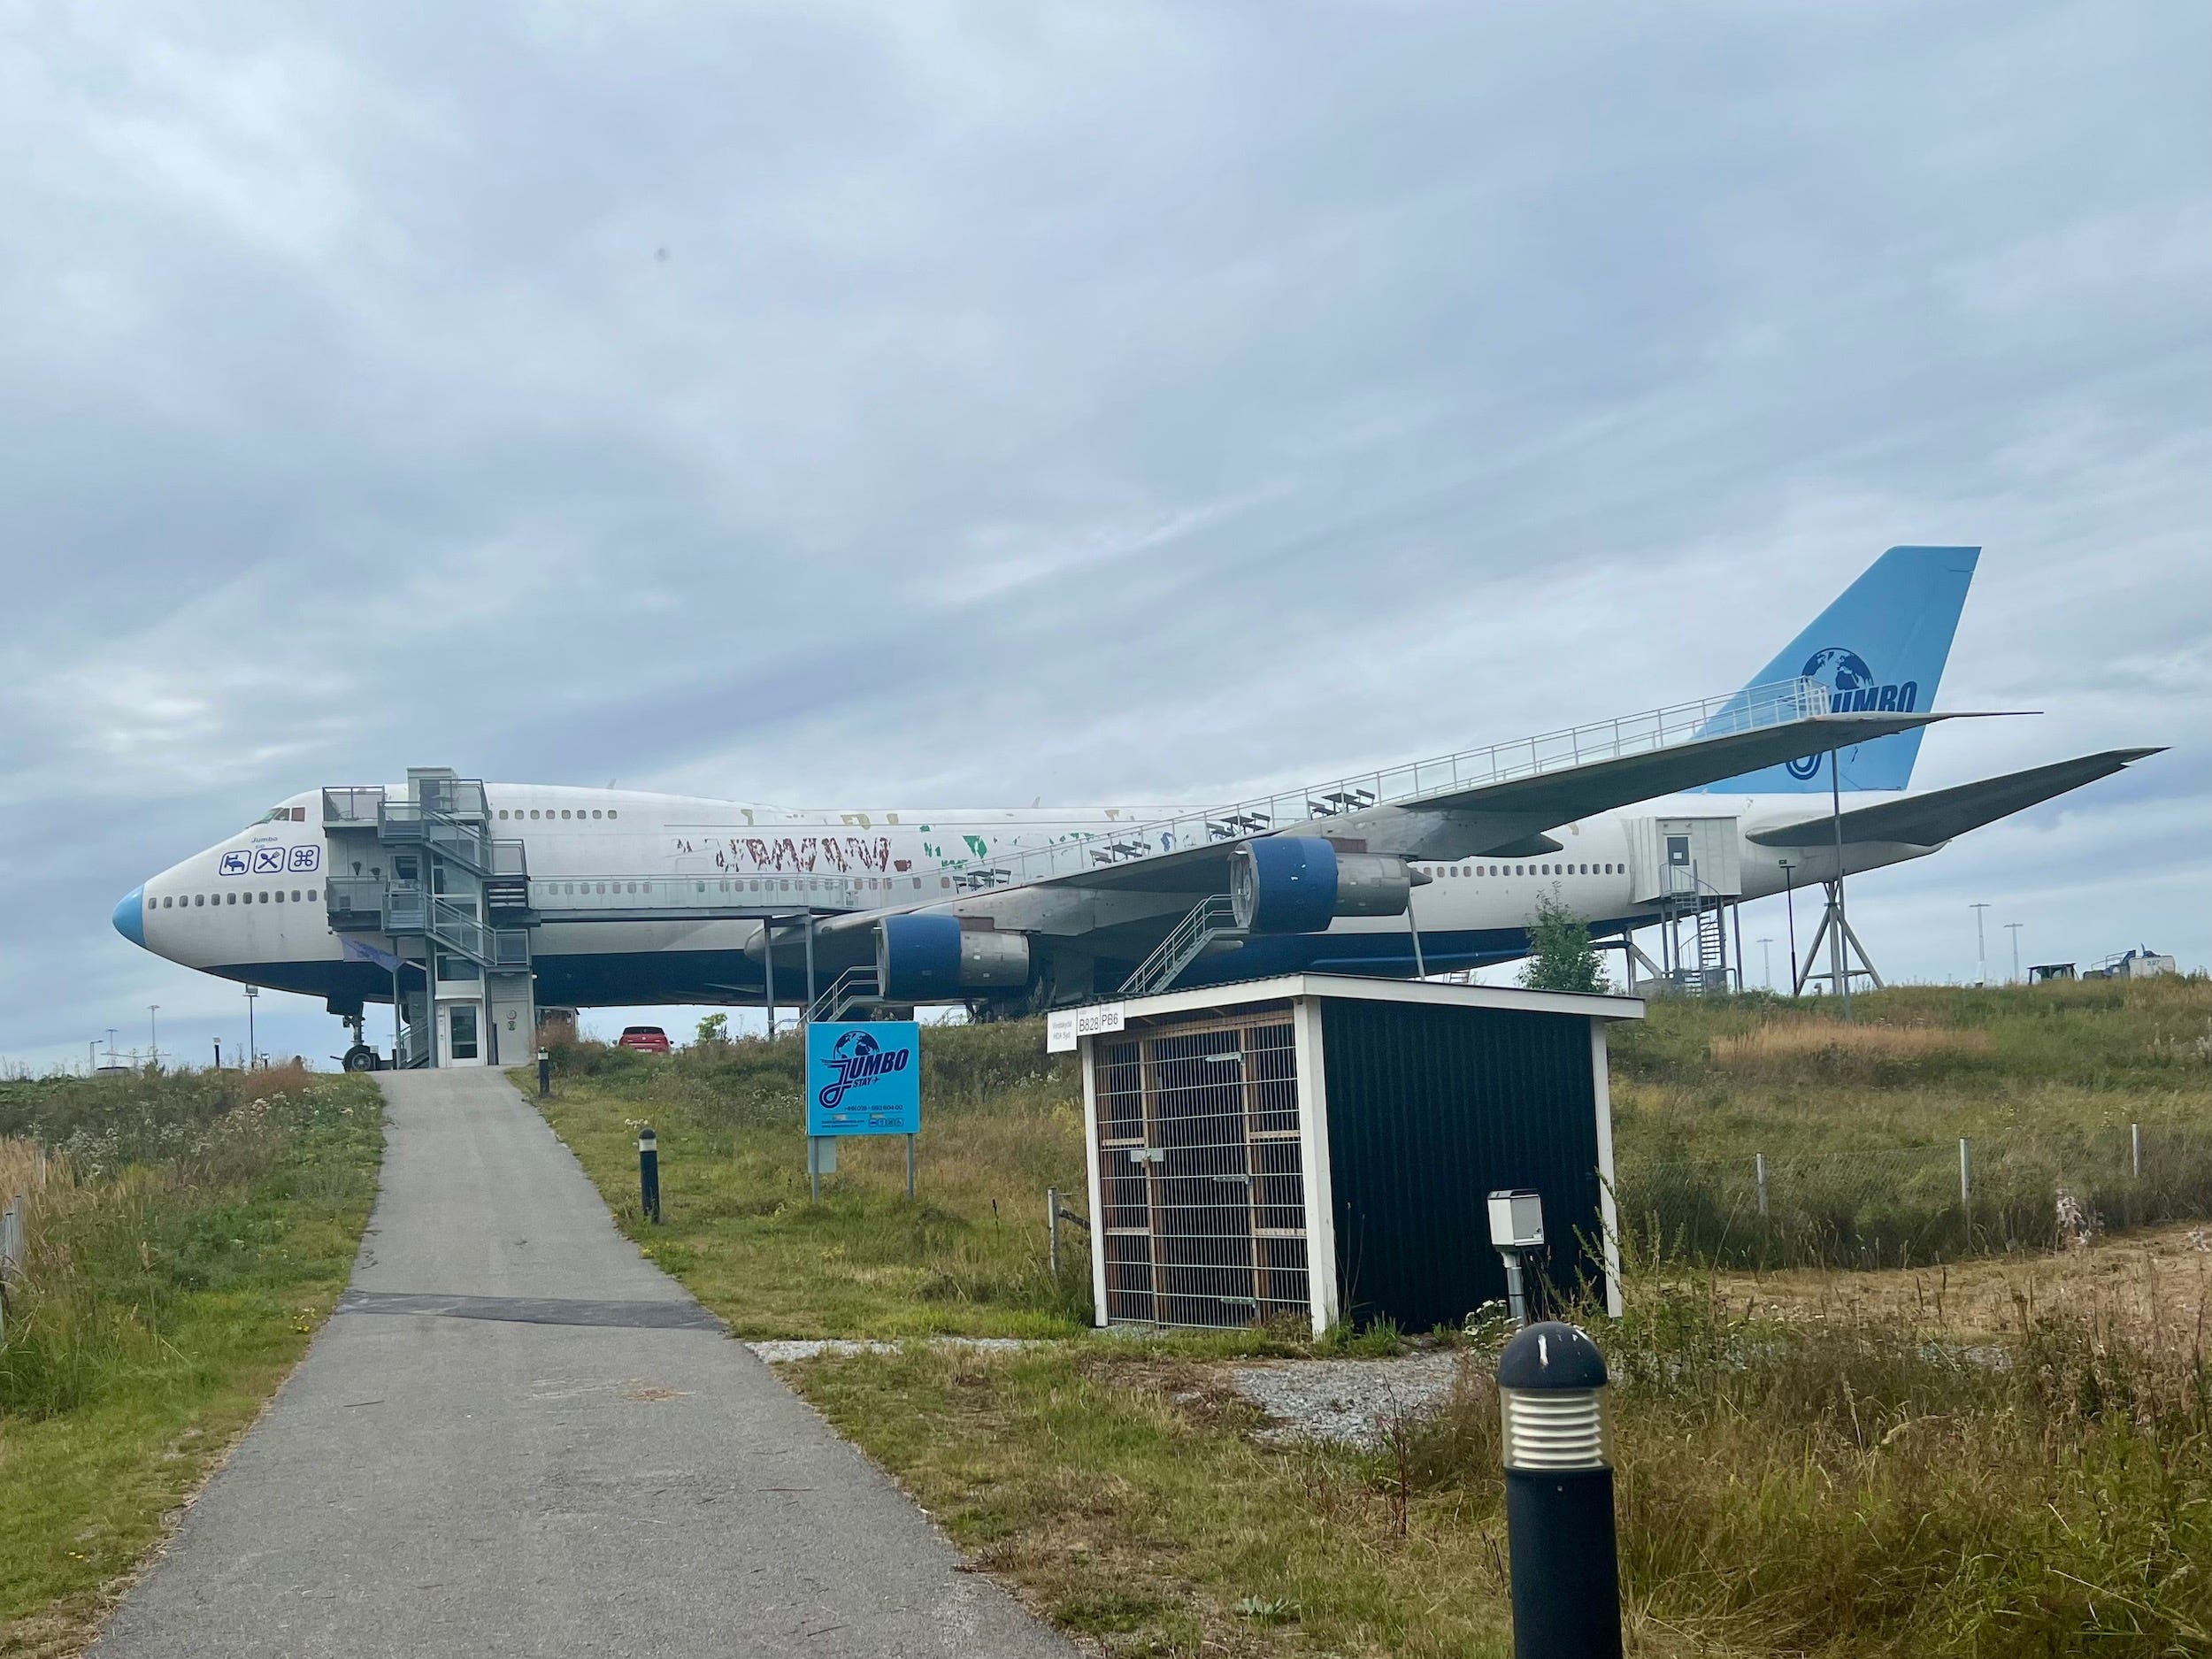 Staying at the Jumbo Stay 747 hotel in Sweden.